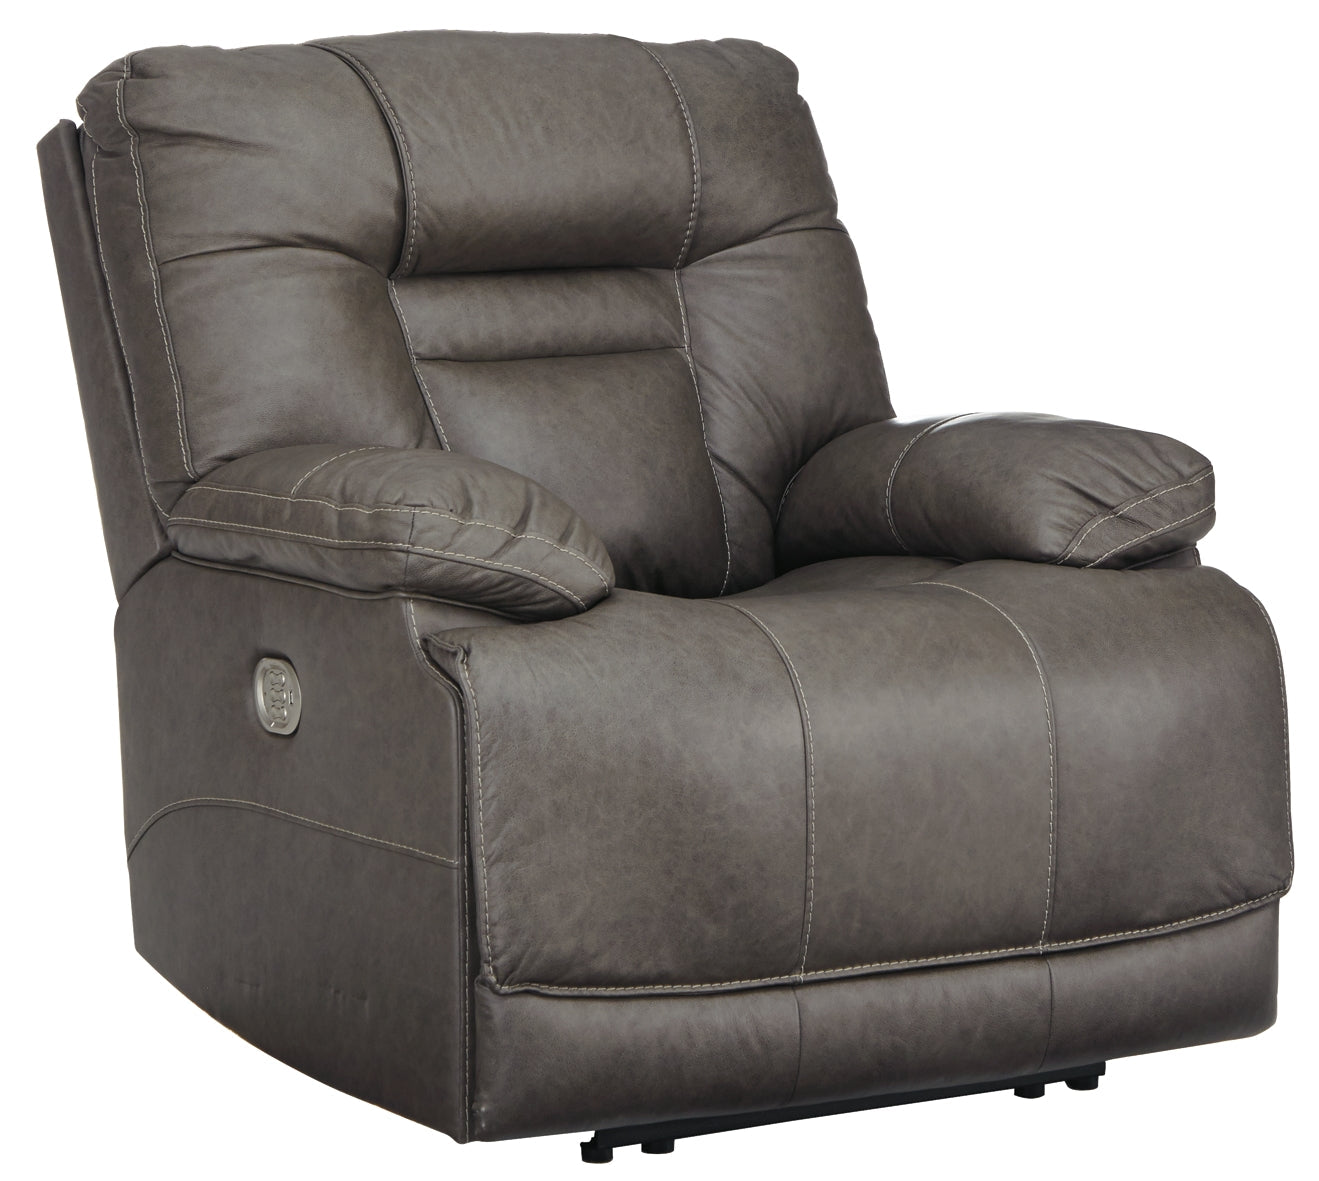 Wurstrow Sofa, Loveseat and Recliner at Cloud 9 Mattress & Furniture furniture, home furnishing, home decor